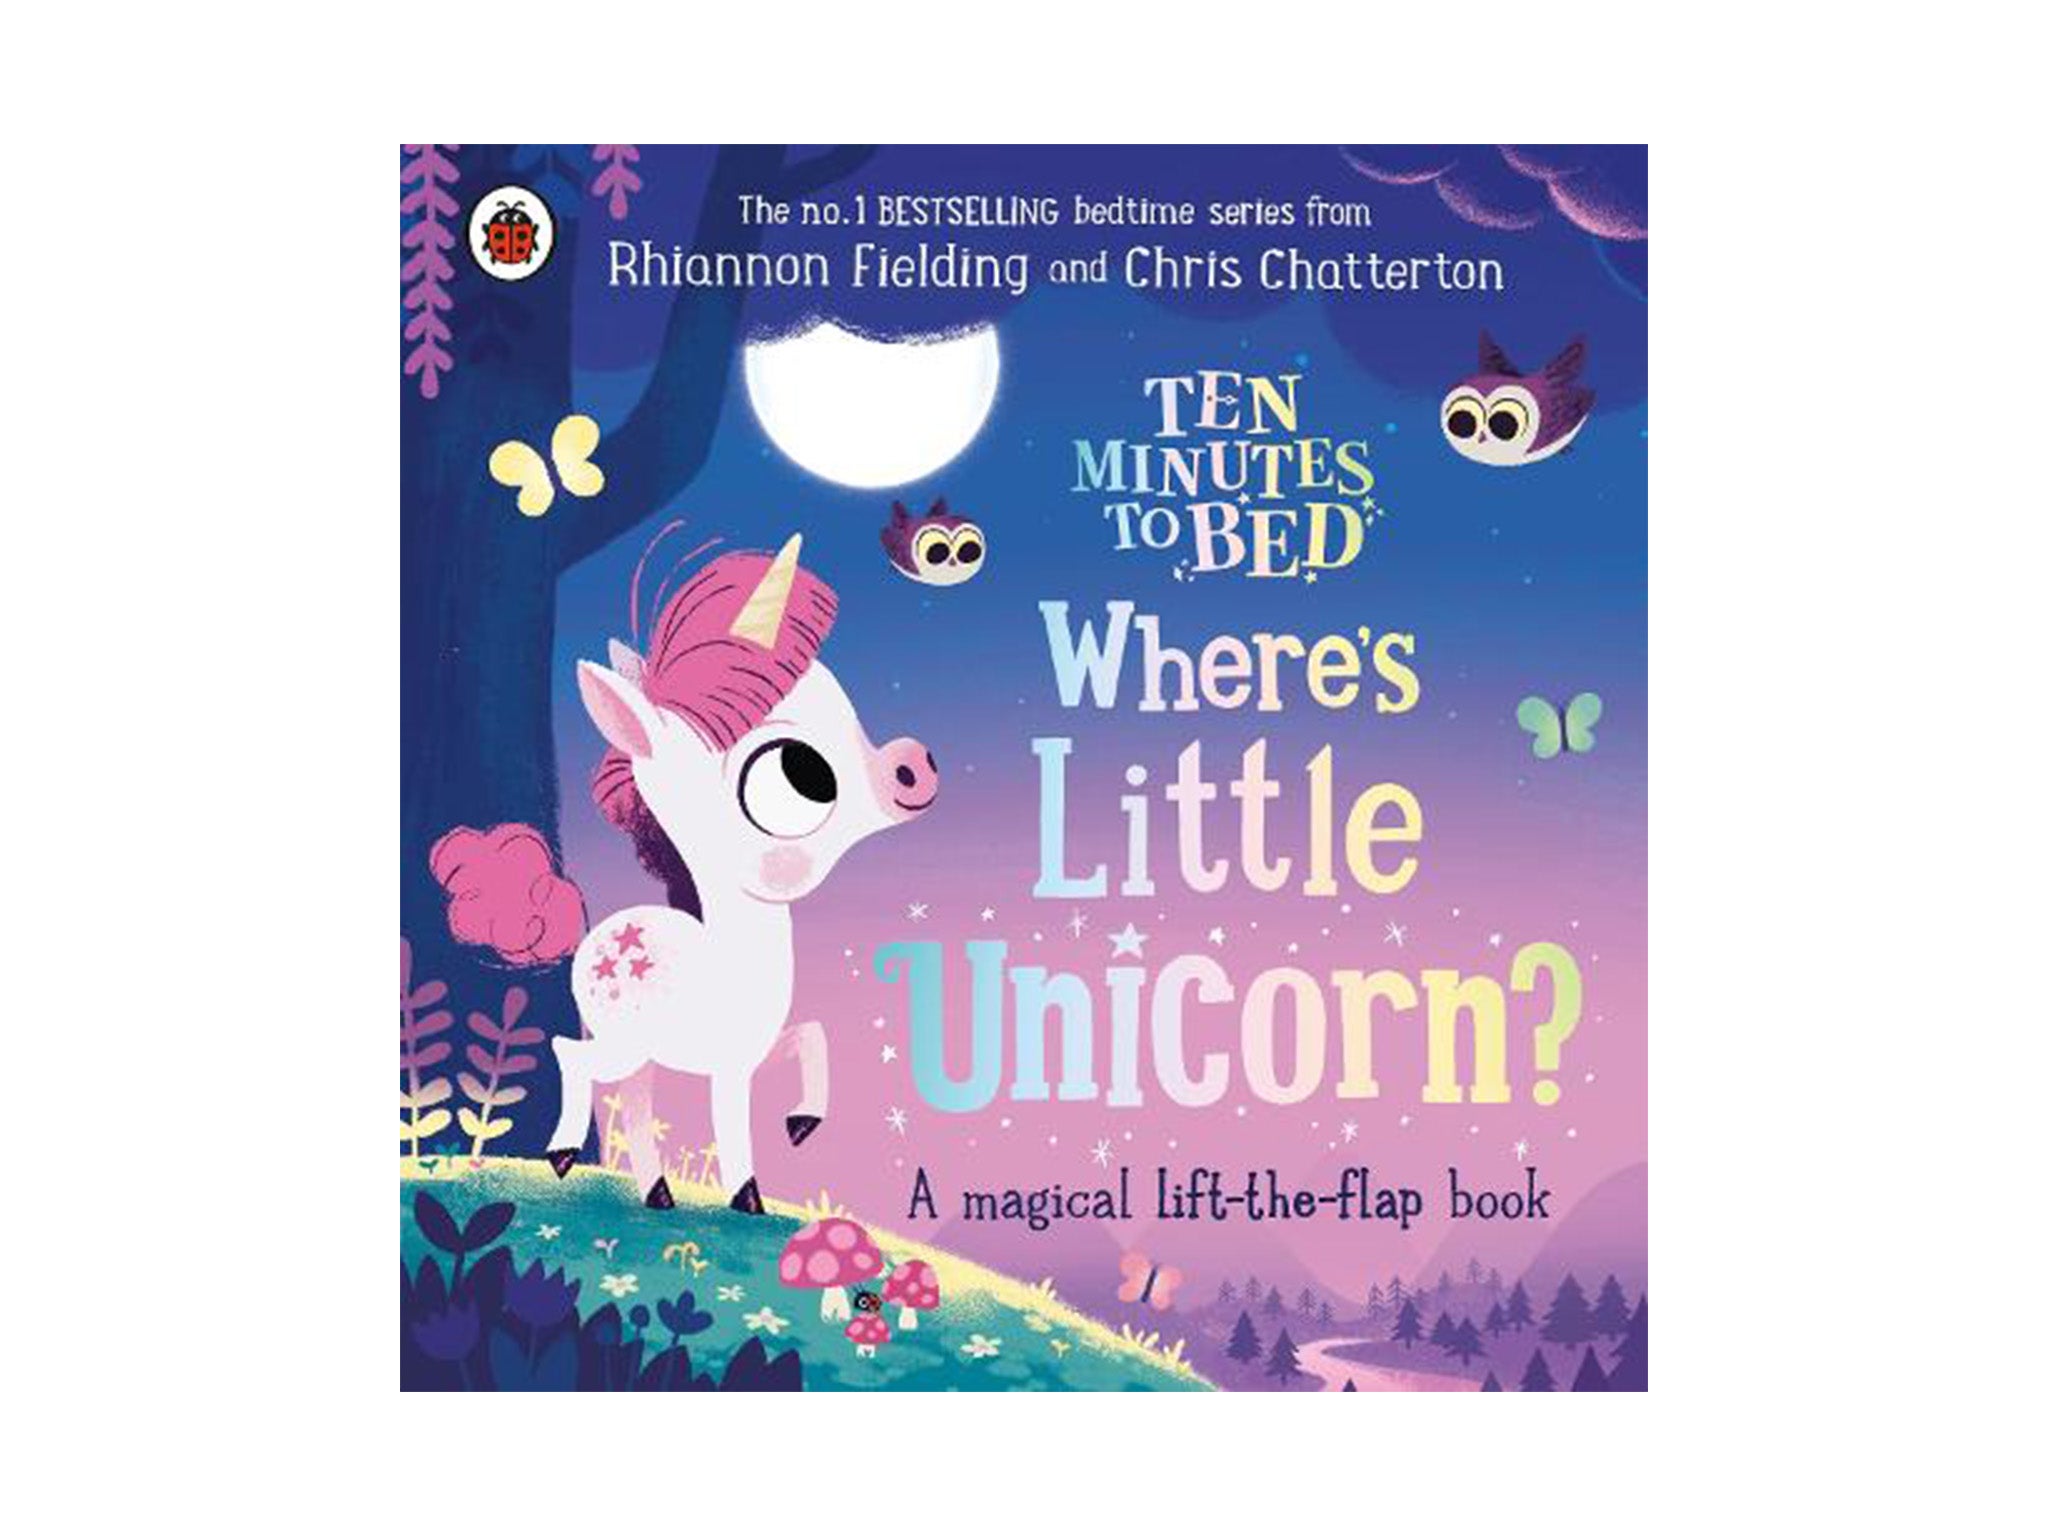 ‘Ten Minutes to Bed: Where’s Little Unicorn, a magical lift-the-flap book', published by Penguin Random House Children’s UK